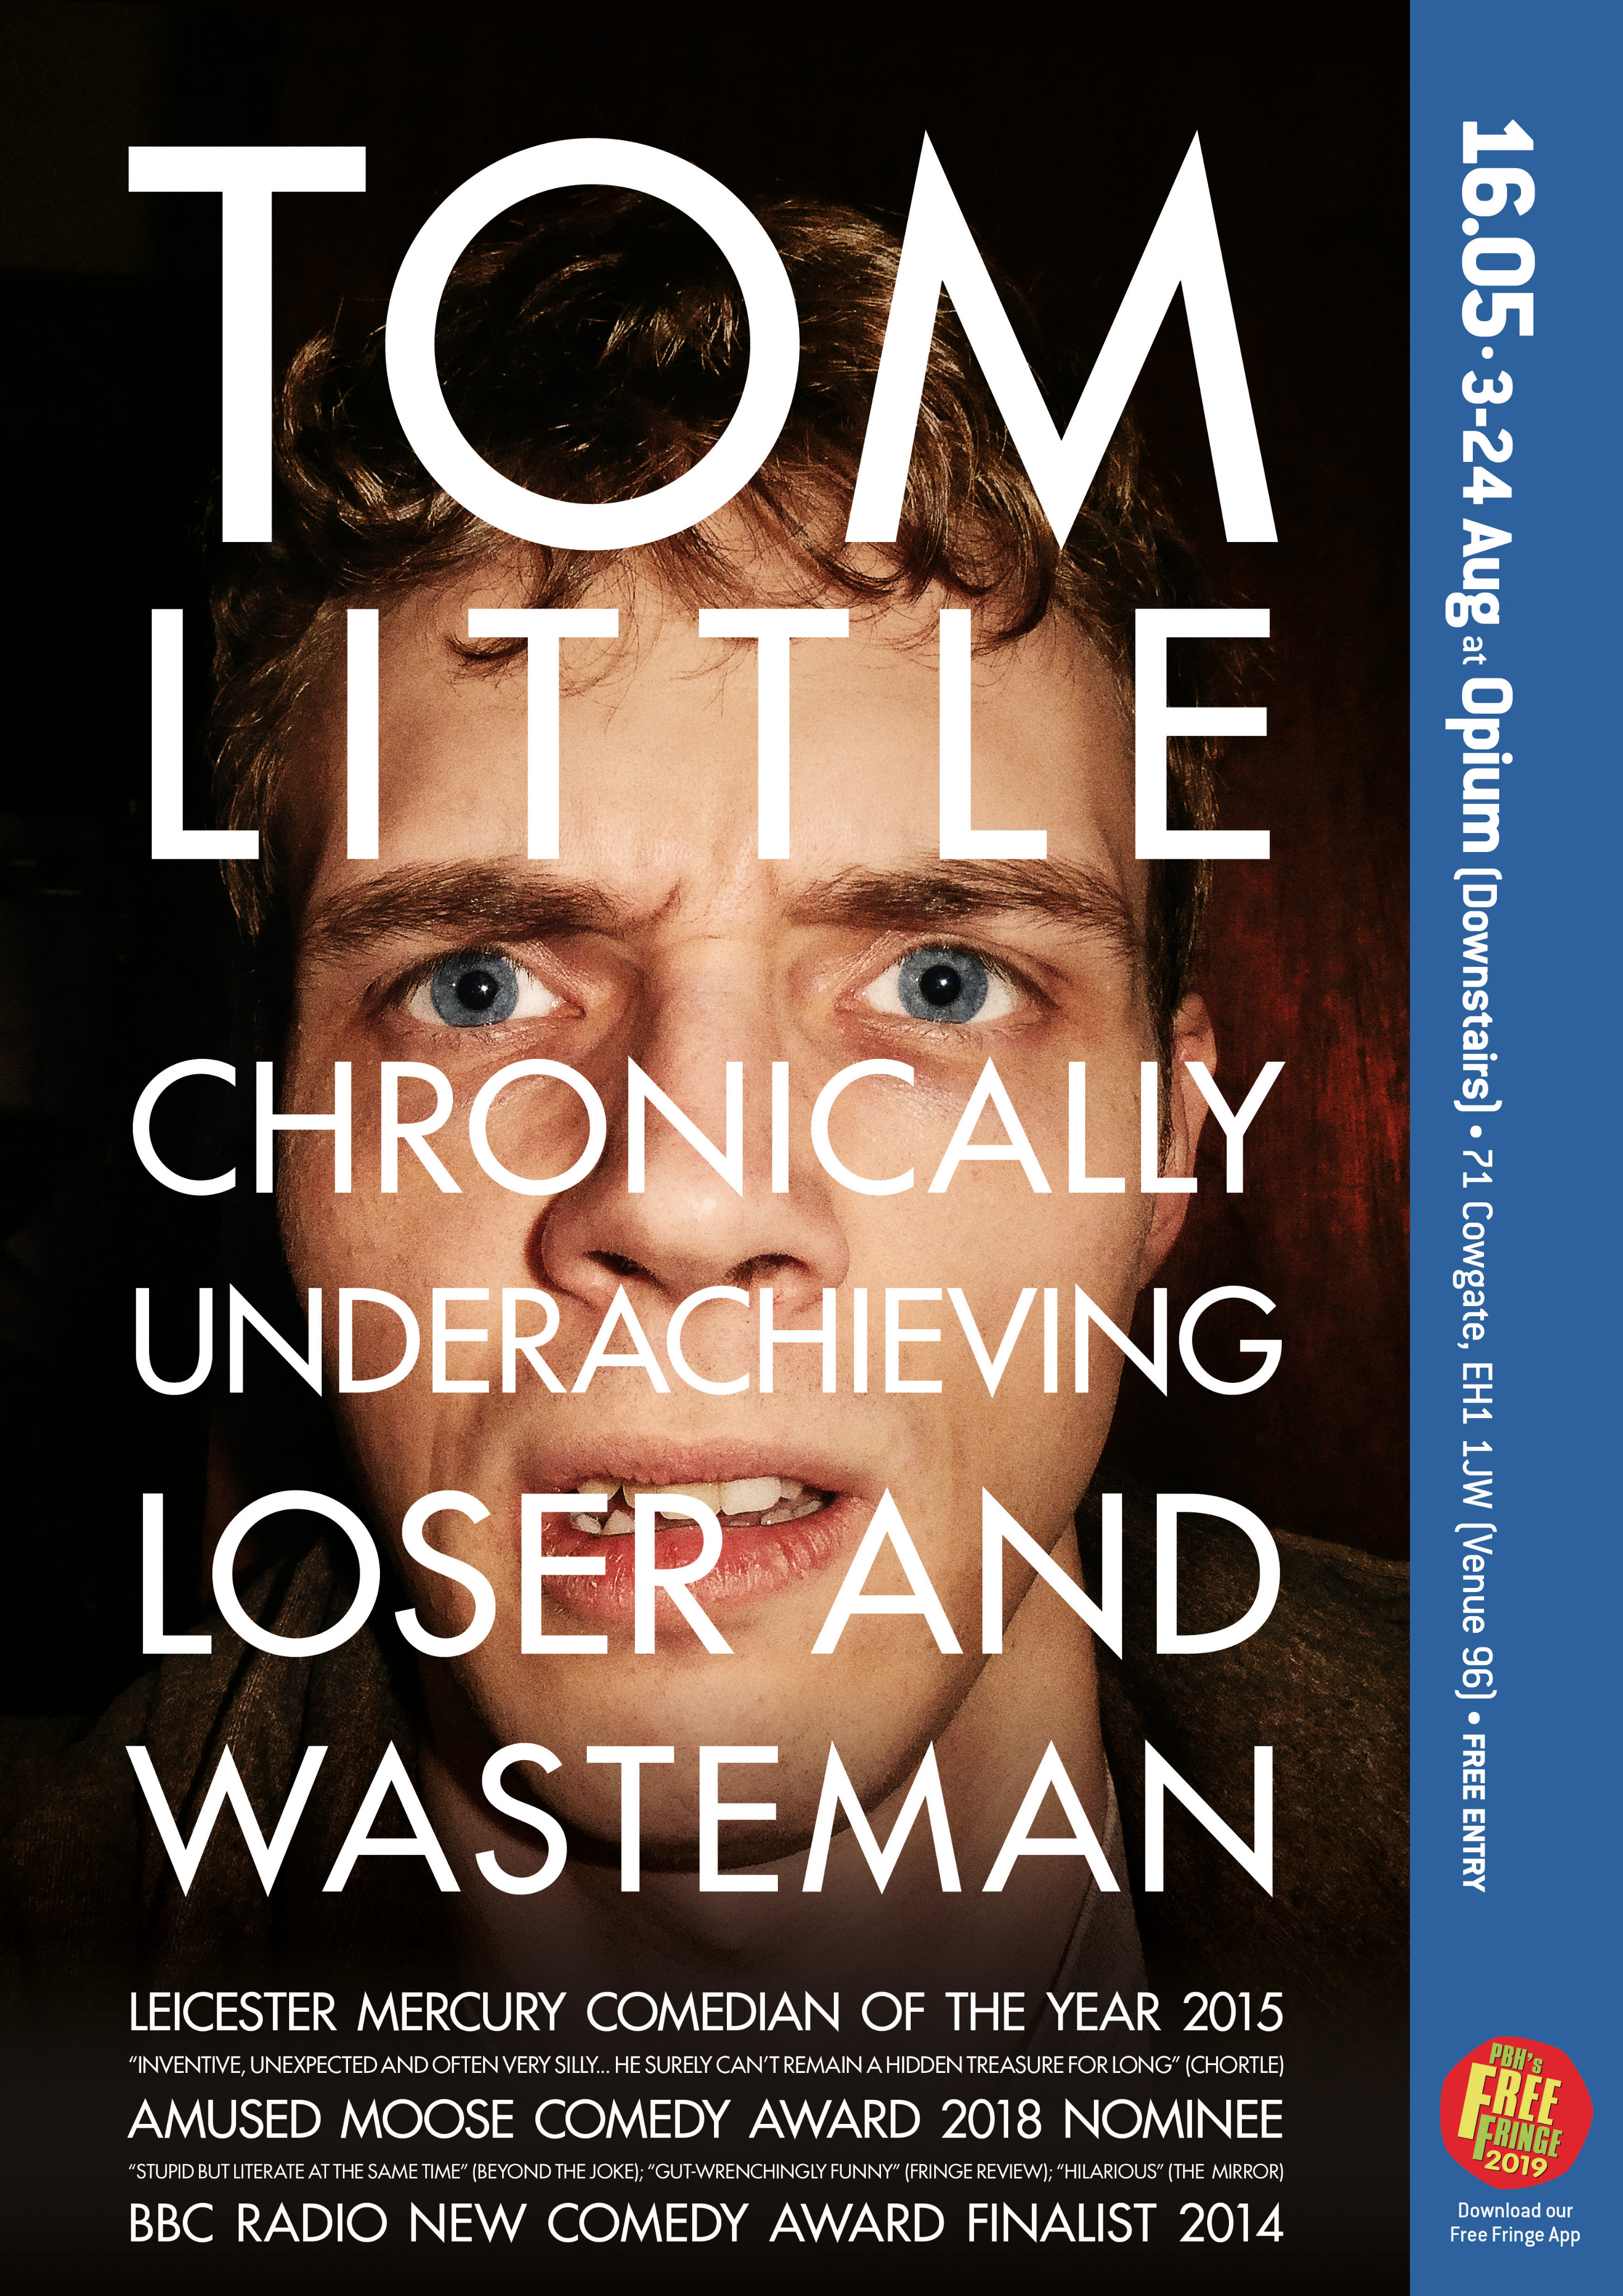 The poster for Tom Little - Chronically Underachieving Loser and Wasteman